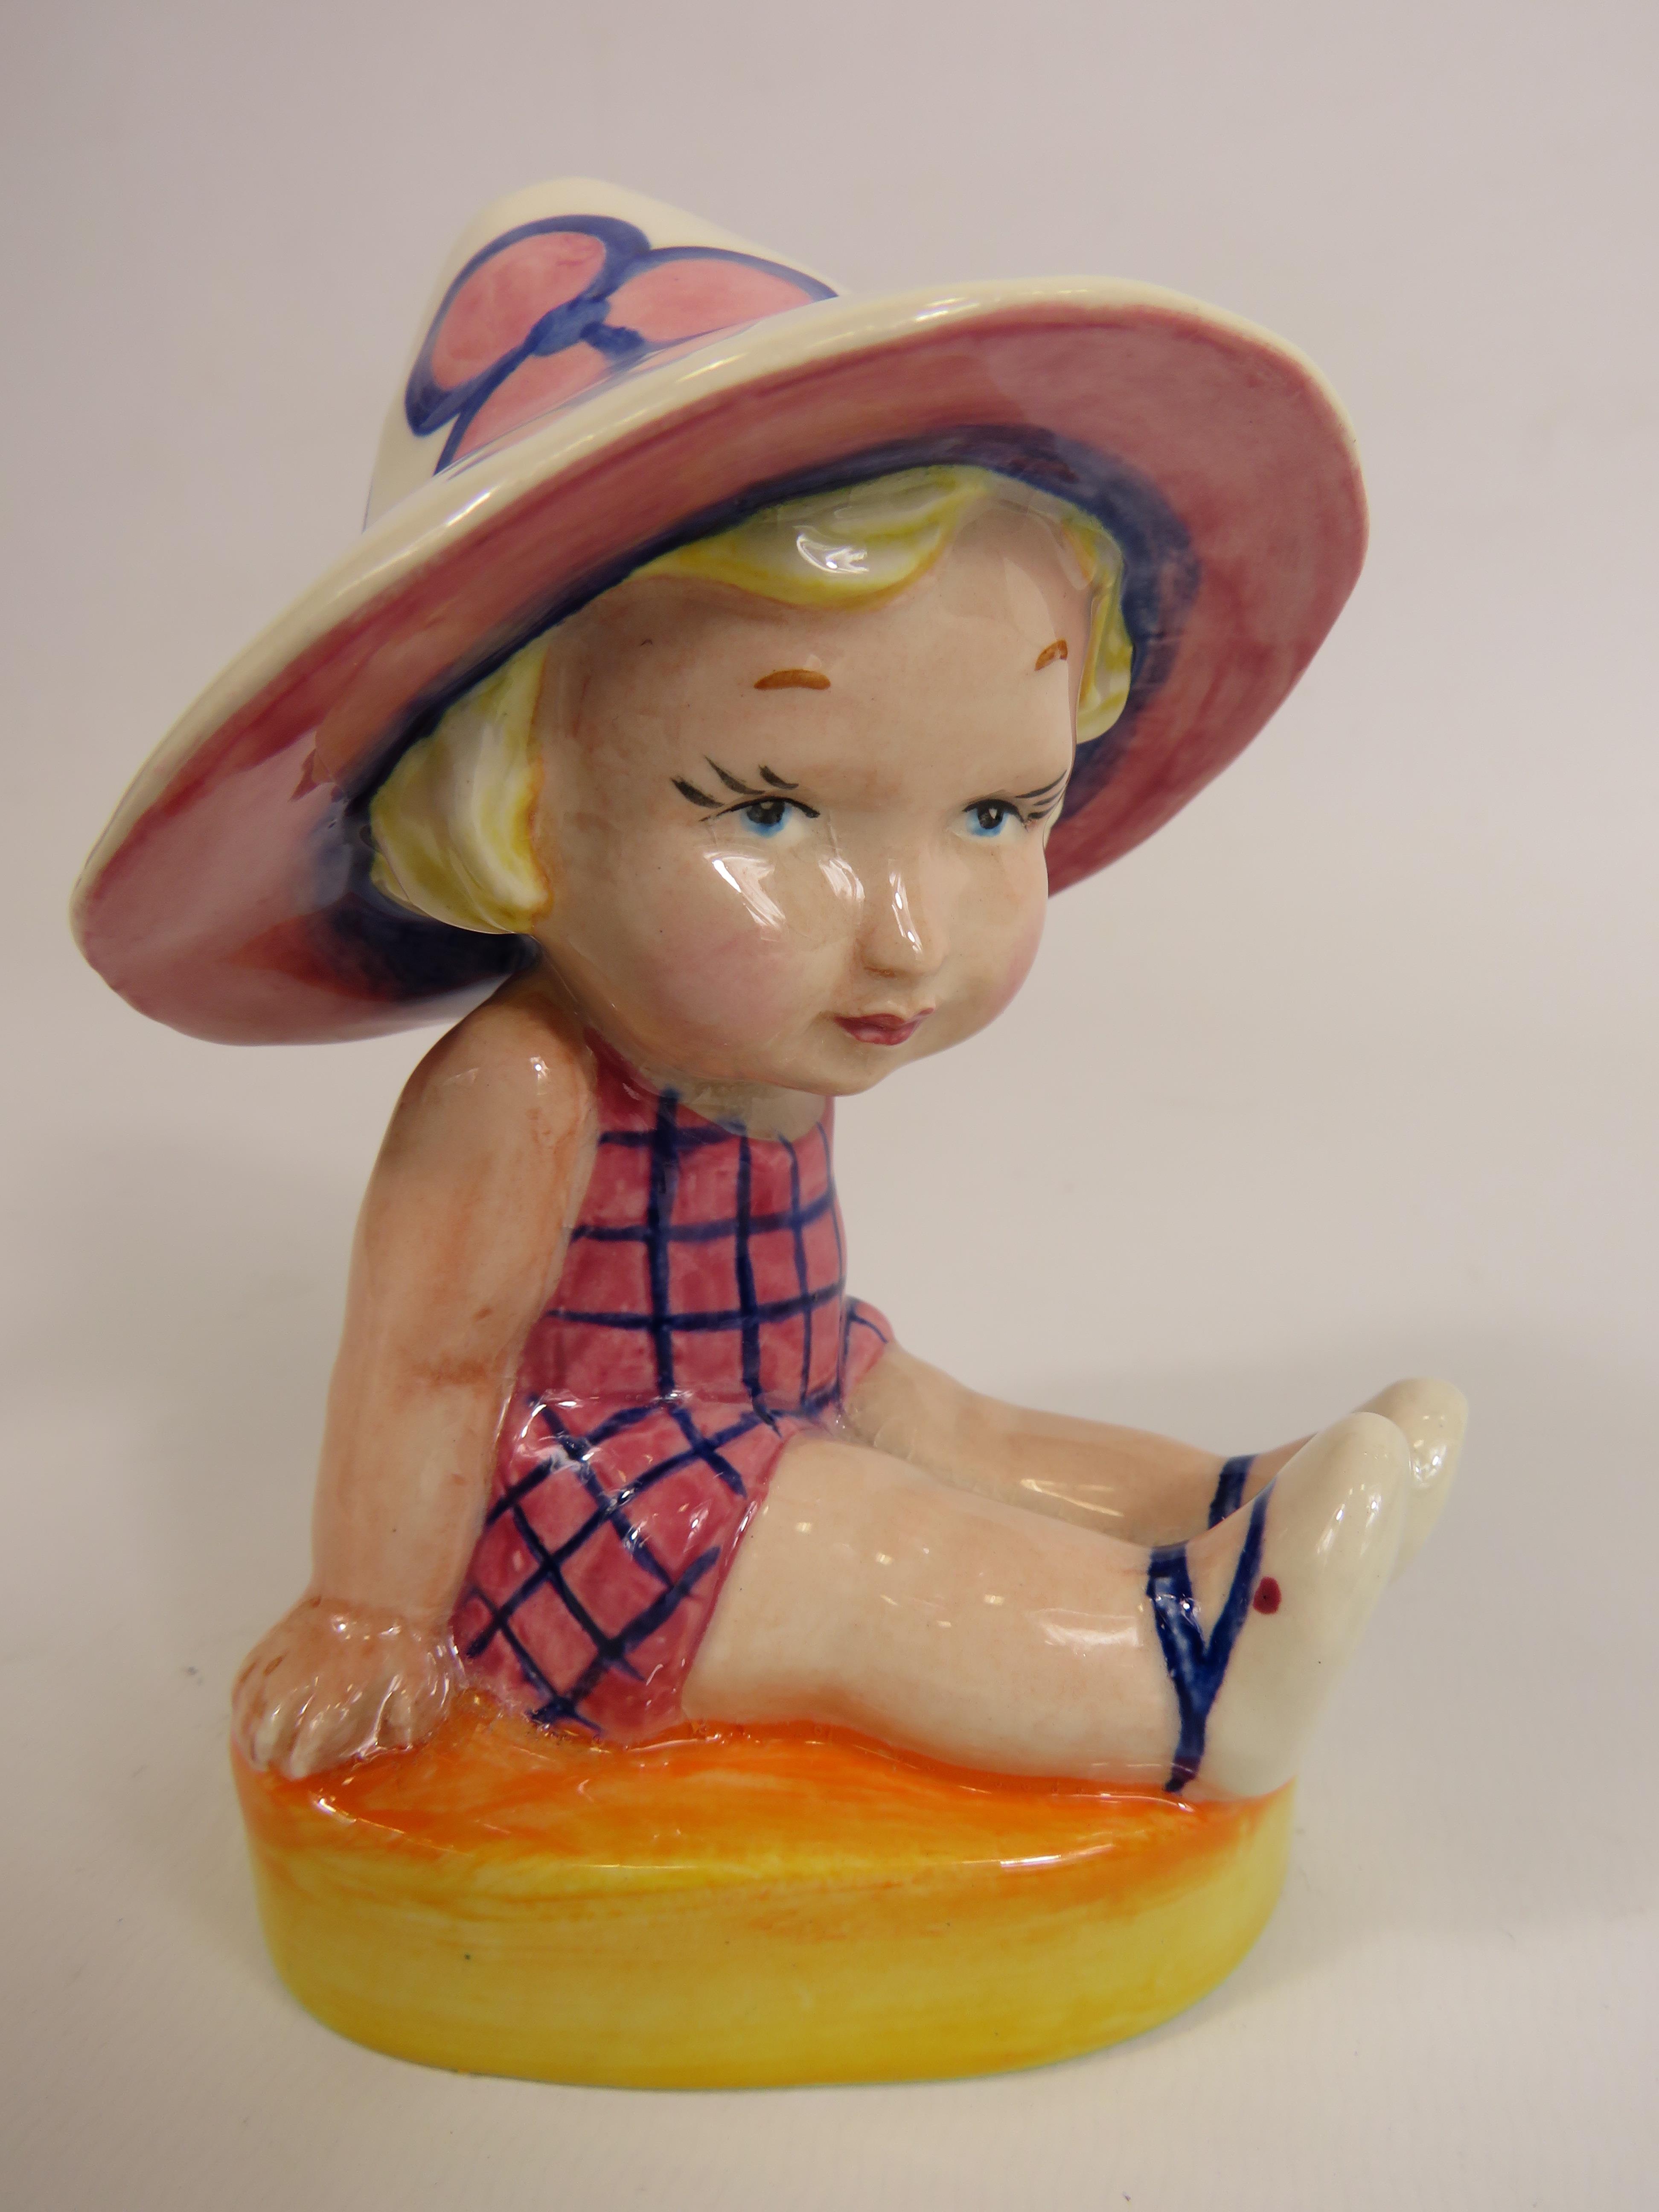 Lorna Bailey Art deco style figurine No 1 of 1, little girl seated wearing a sun hat. 13cm tall.